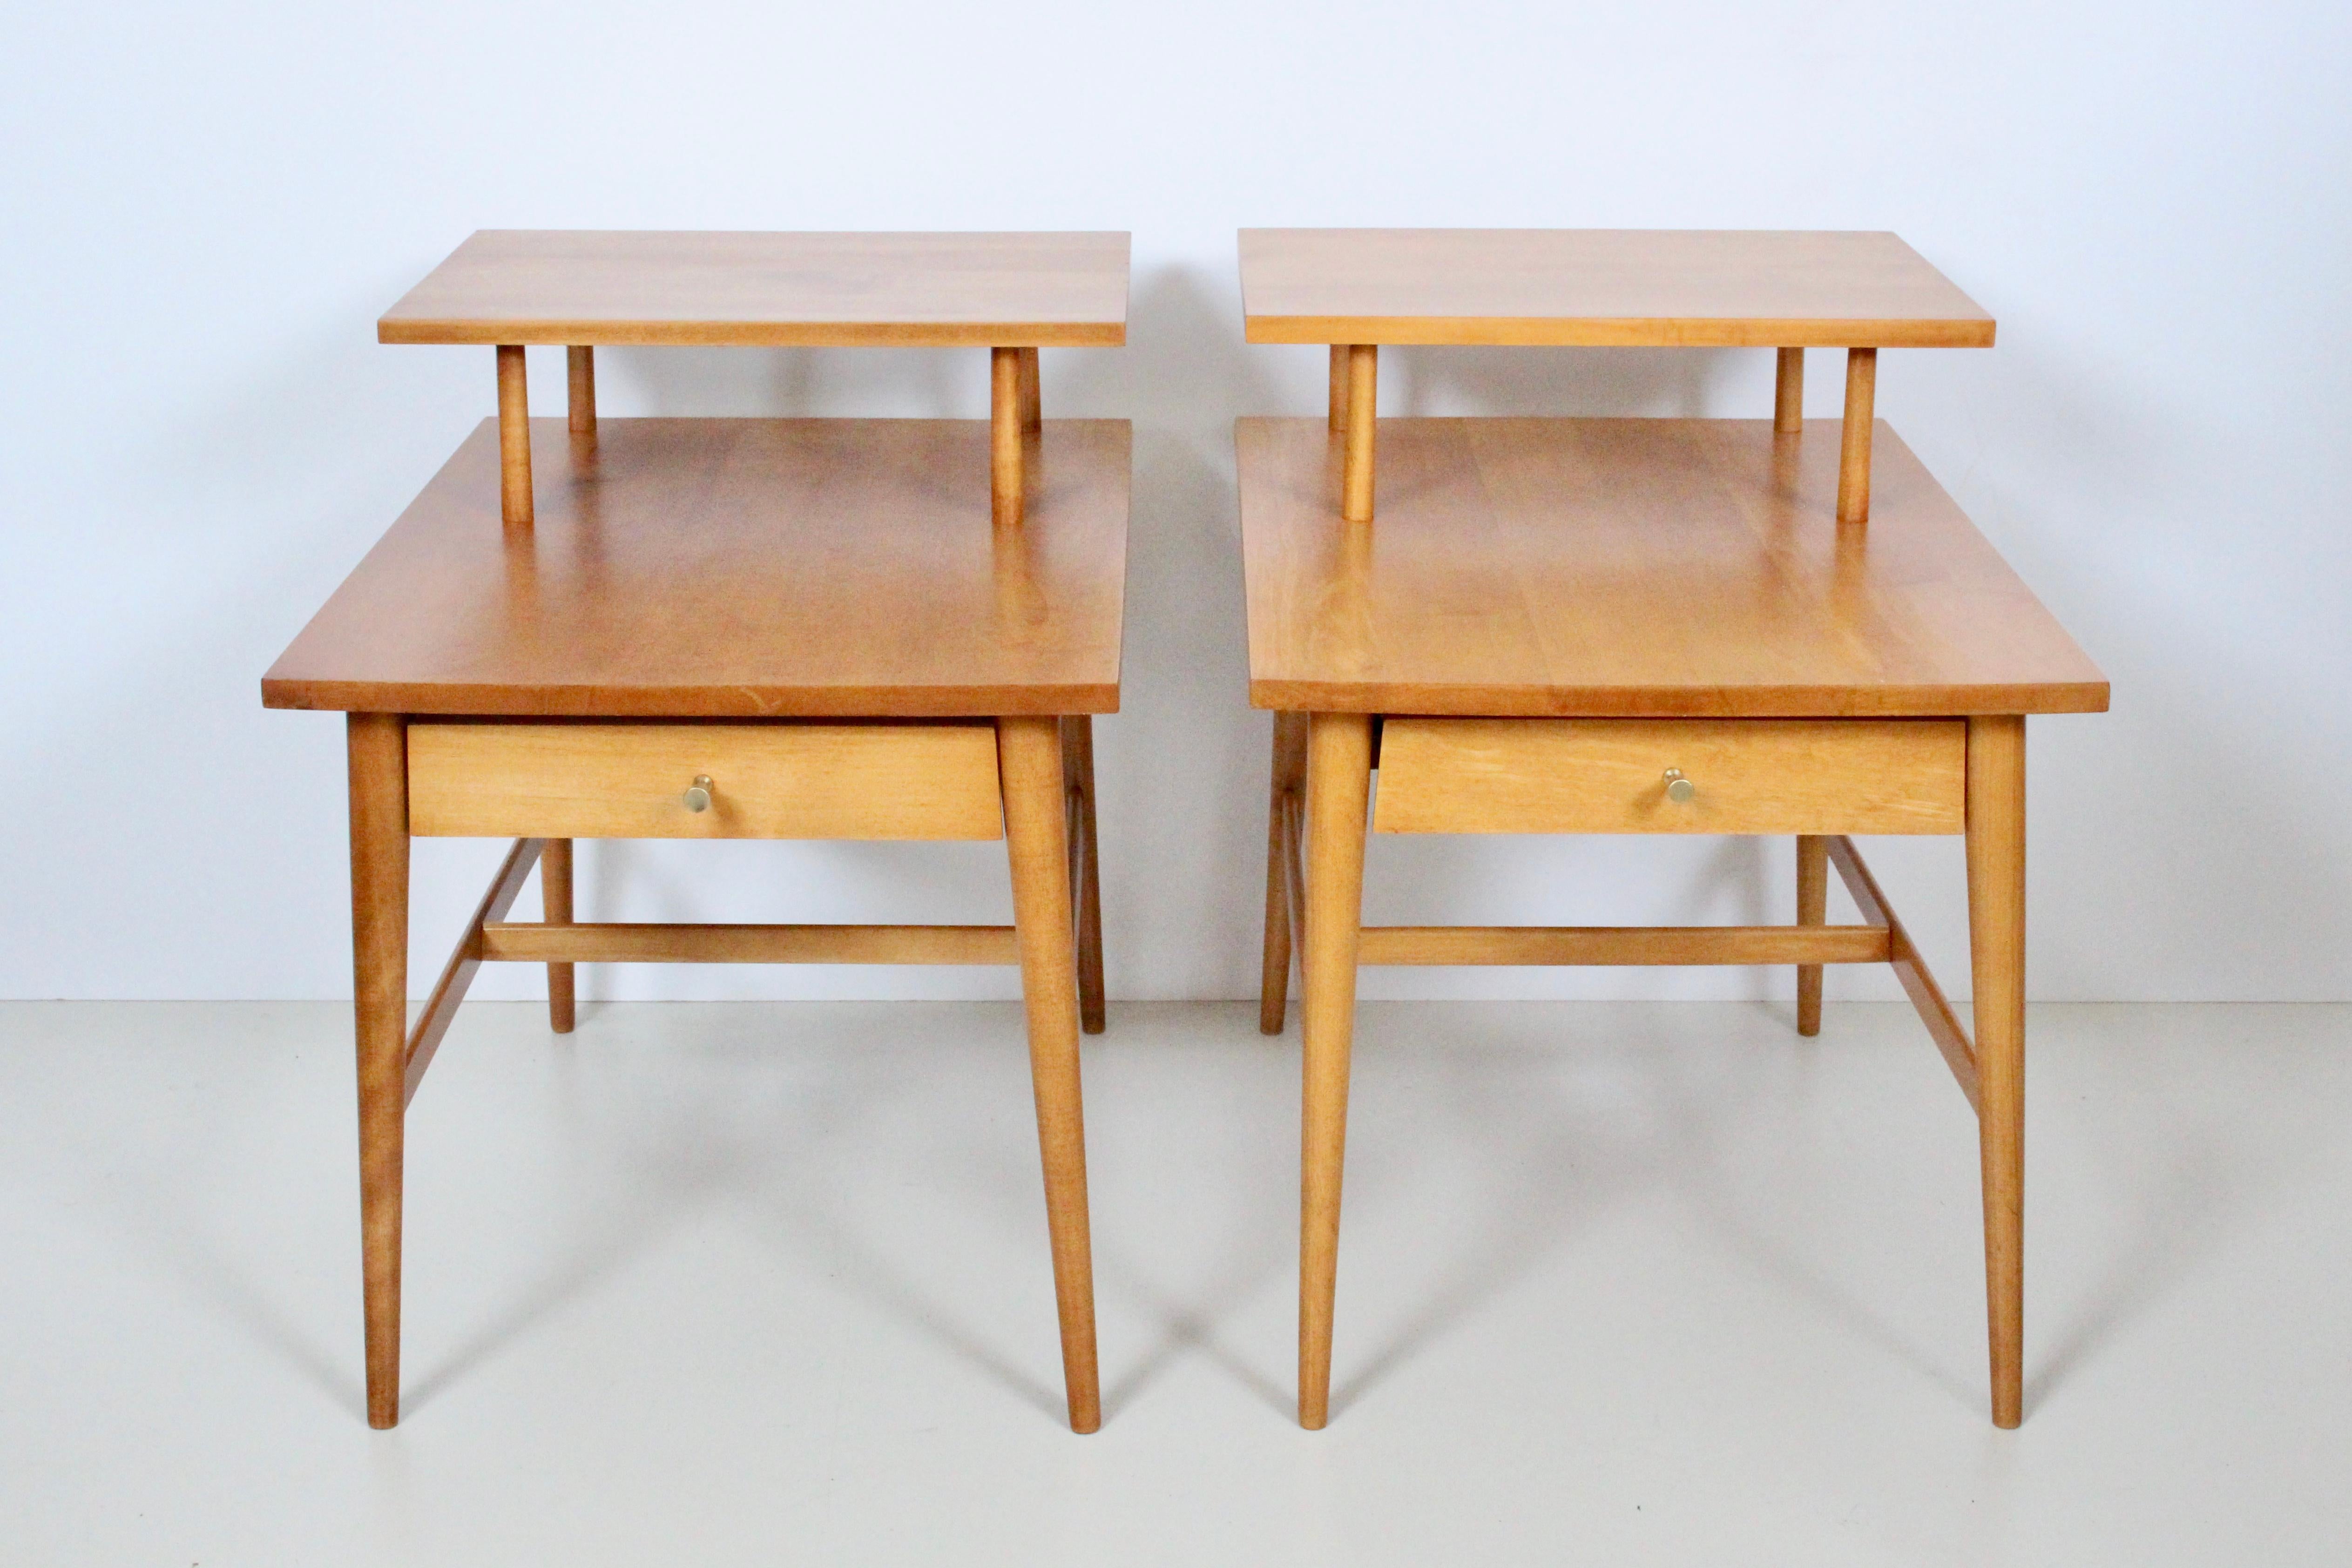 Pair Paul McCobb for Planner Group, Winchendon Furniture #1589 Step Tables, 1950s-1960s. End Tables. Side Tables. Nightstands. Featuring solid two-tier rectangular form, deep single drawers with signature McCobb hourglass pulls. CLassic American Mid